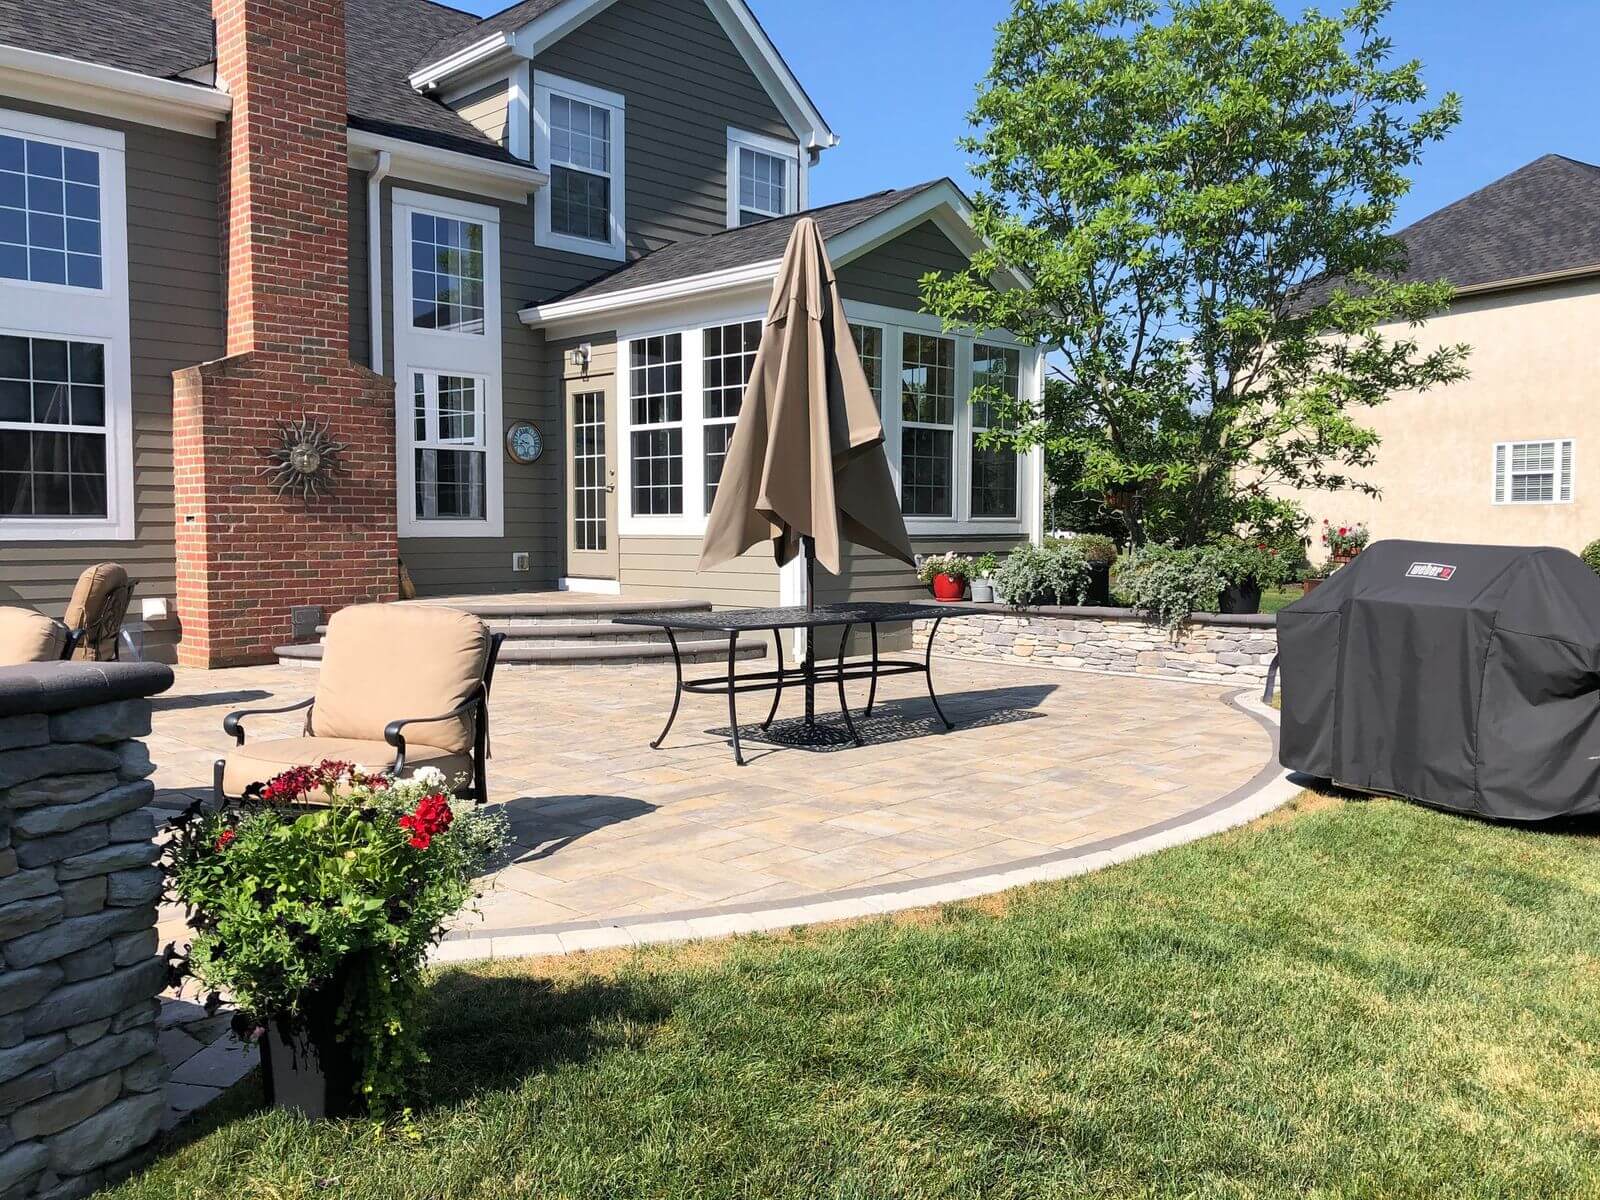 furnished paver patio